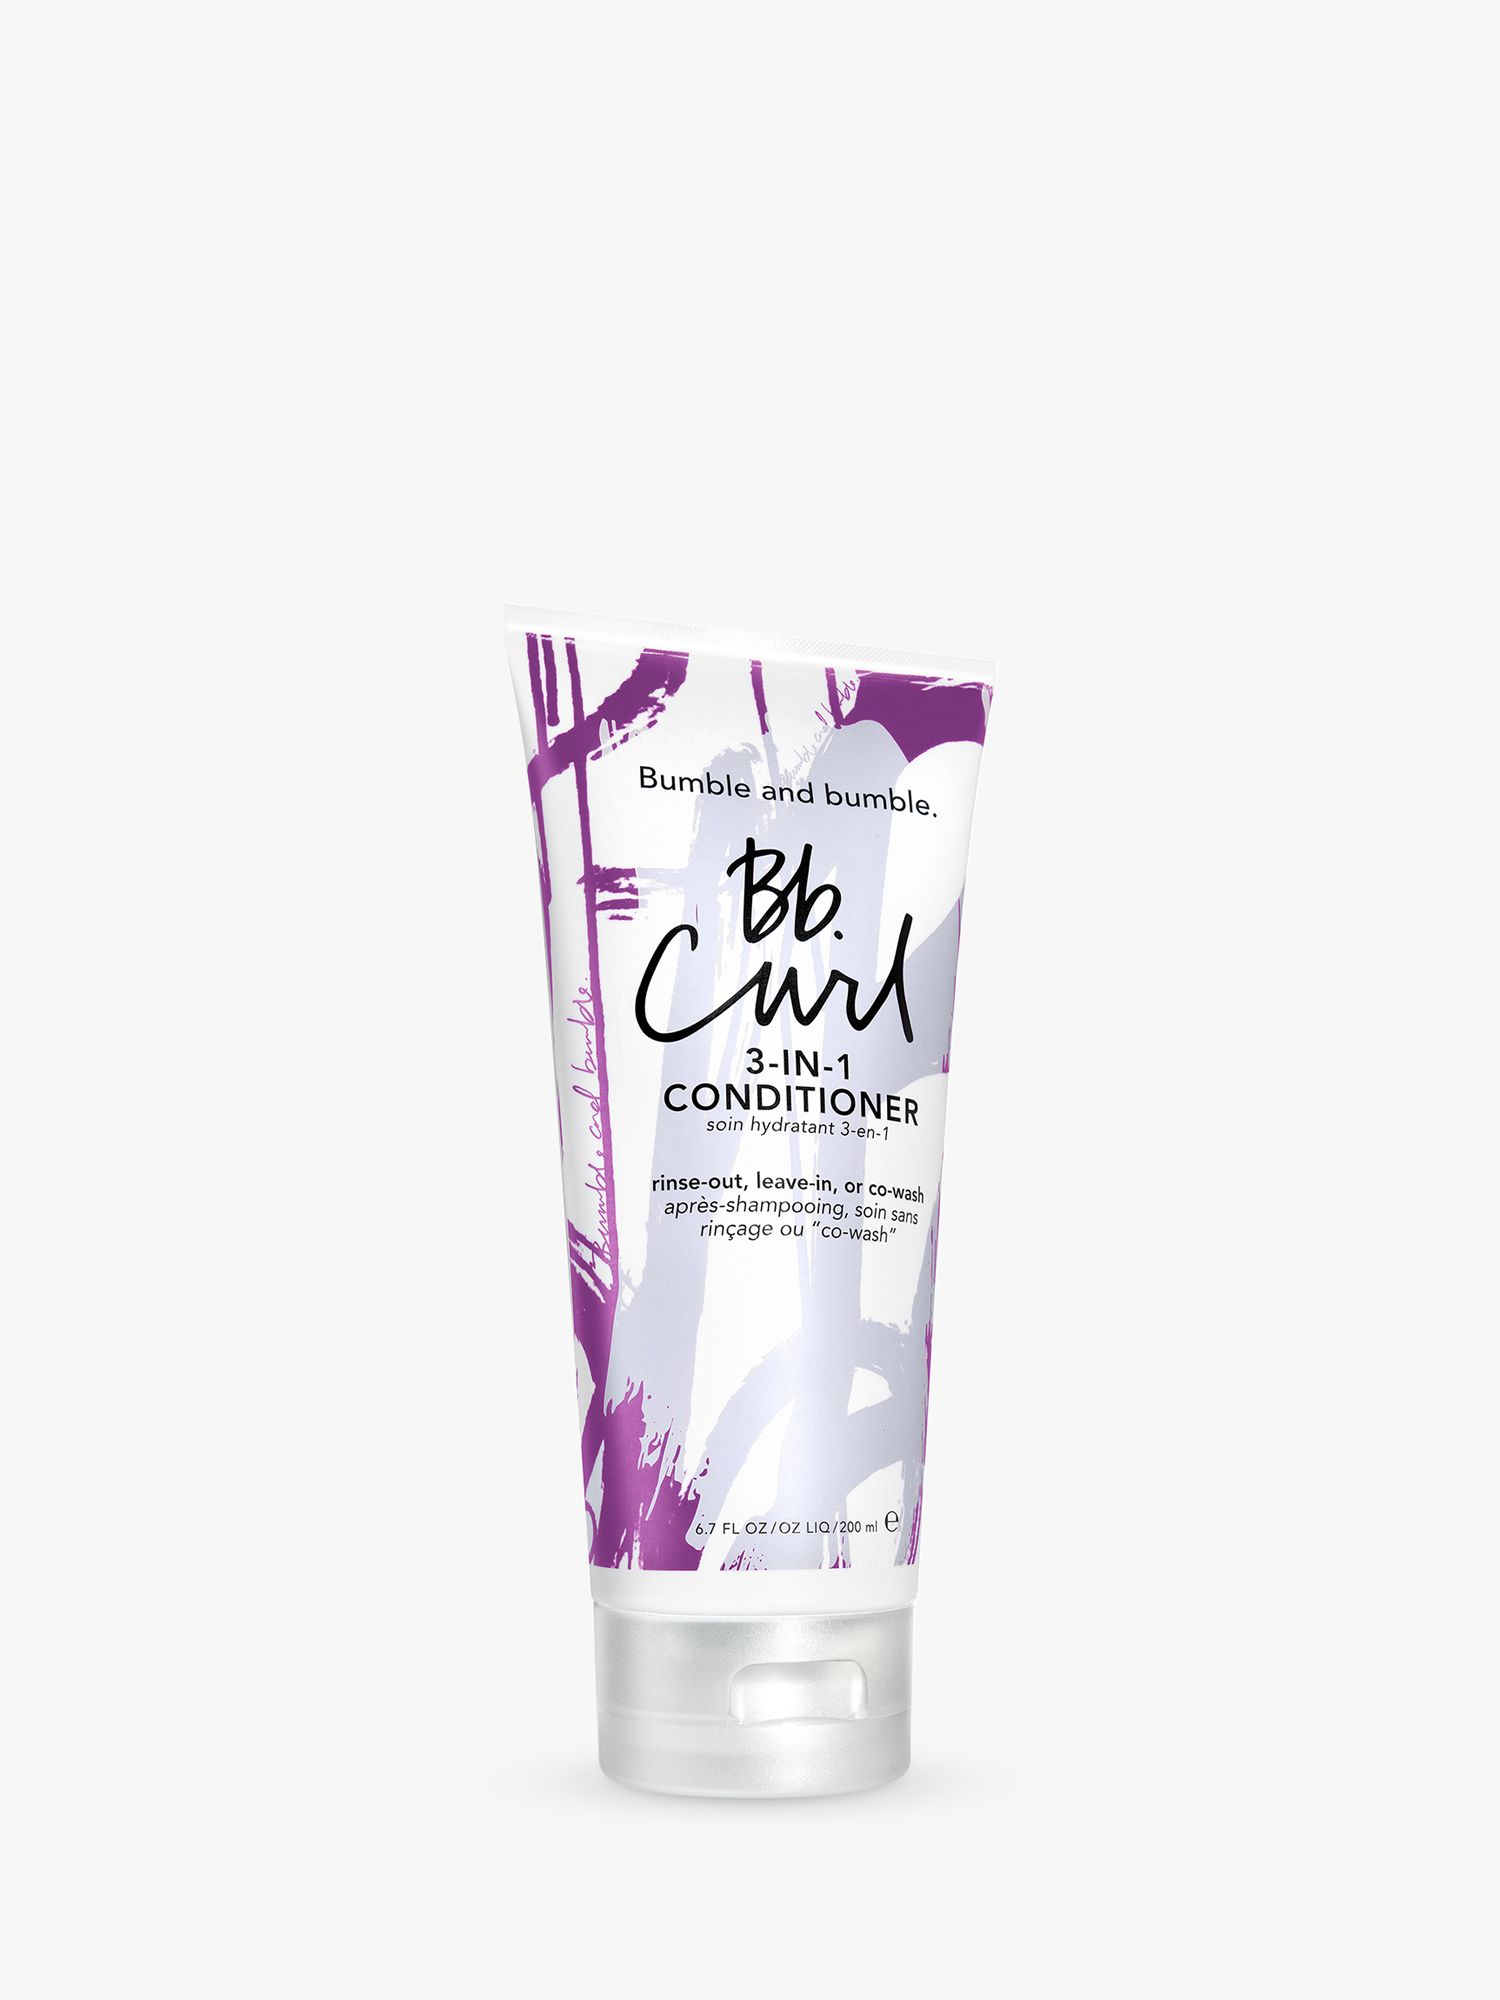 Bumble and bumble Curl 3in1 Conditioner, 200ml 1